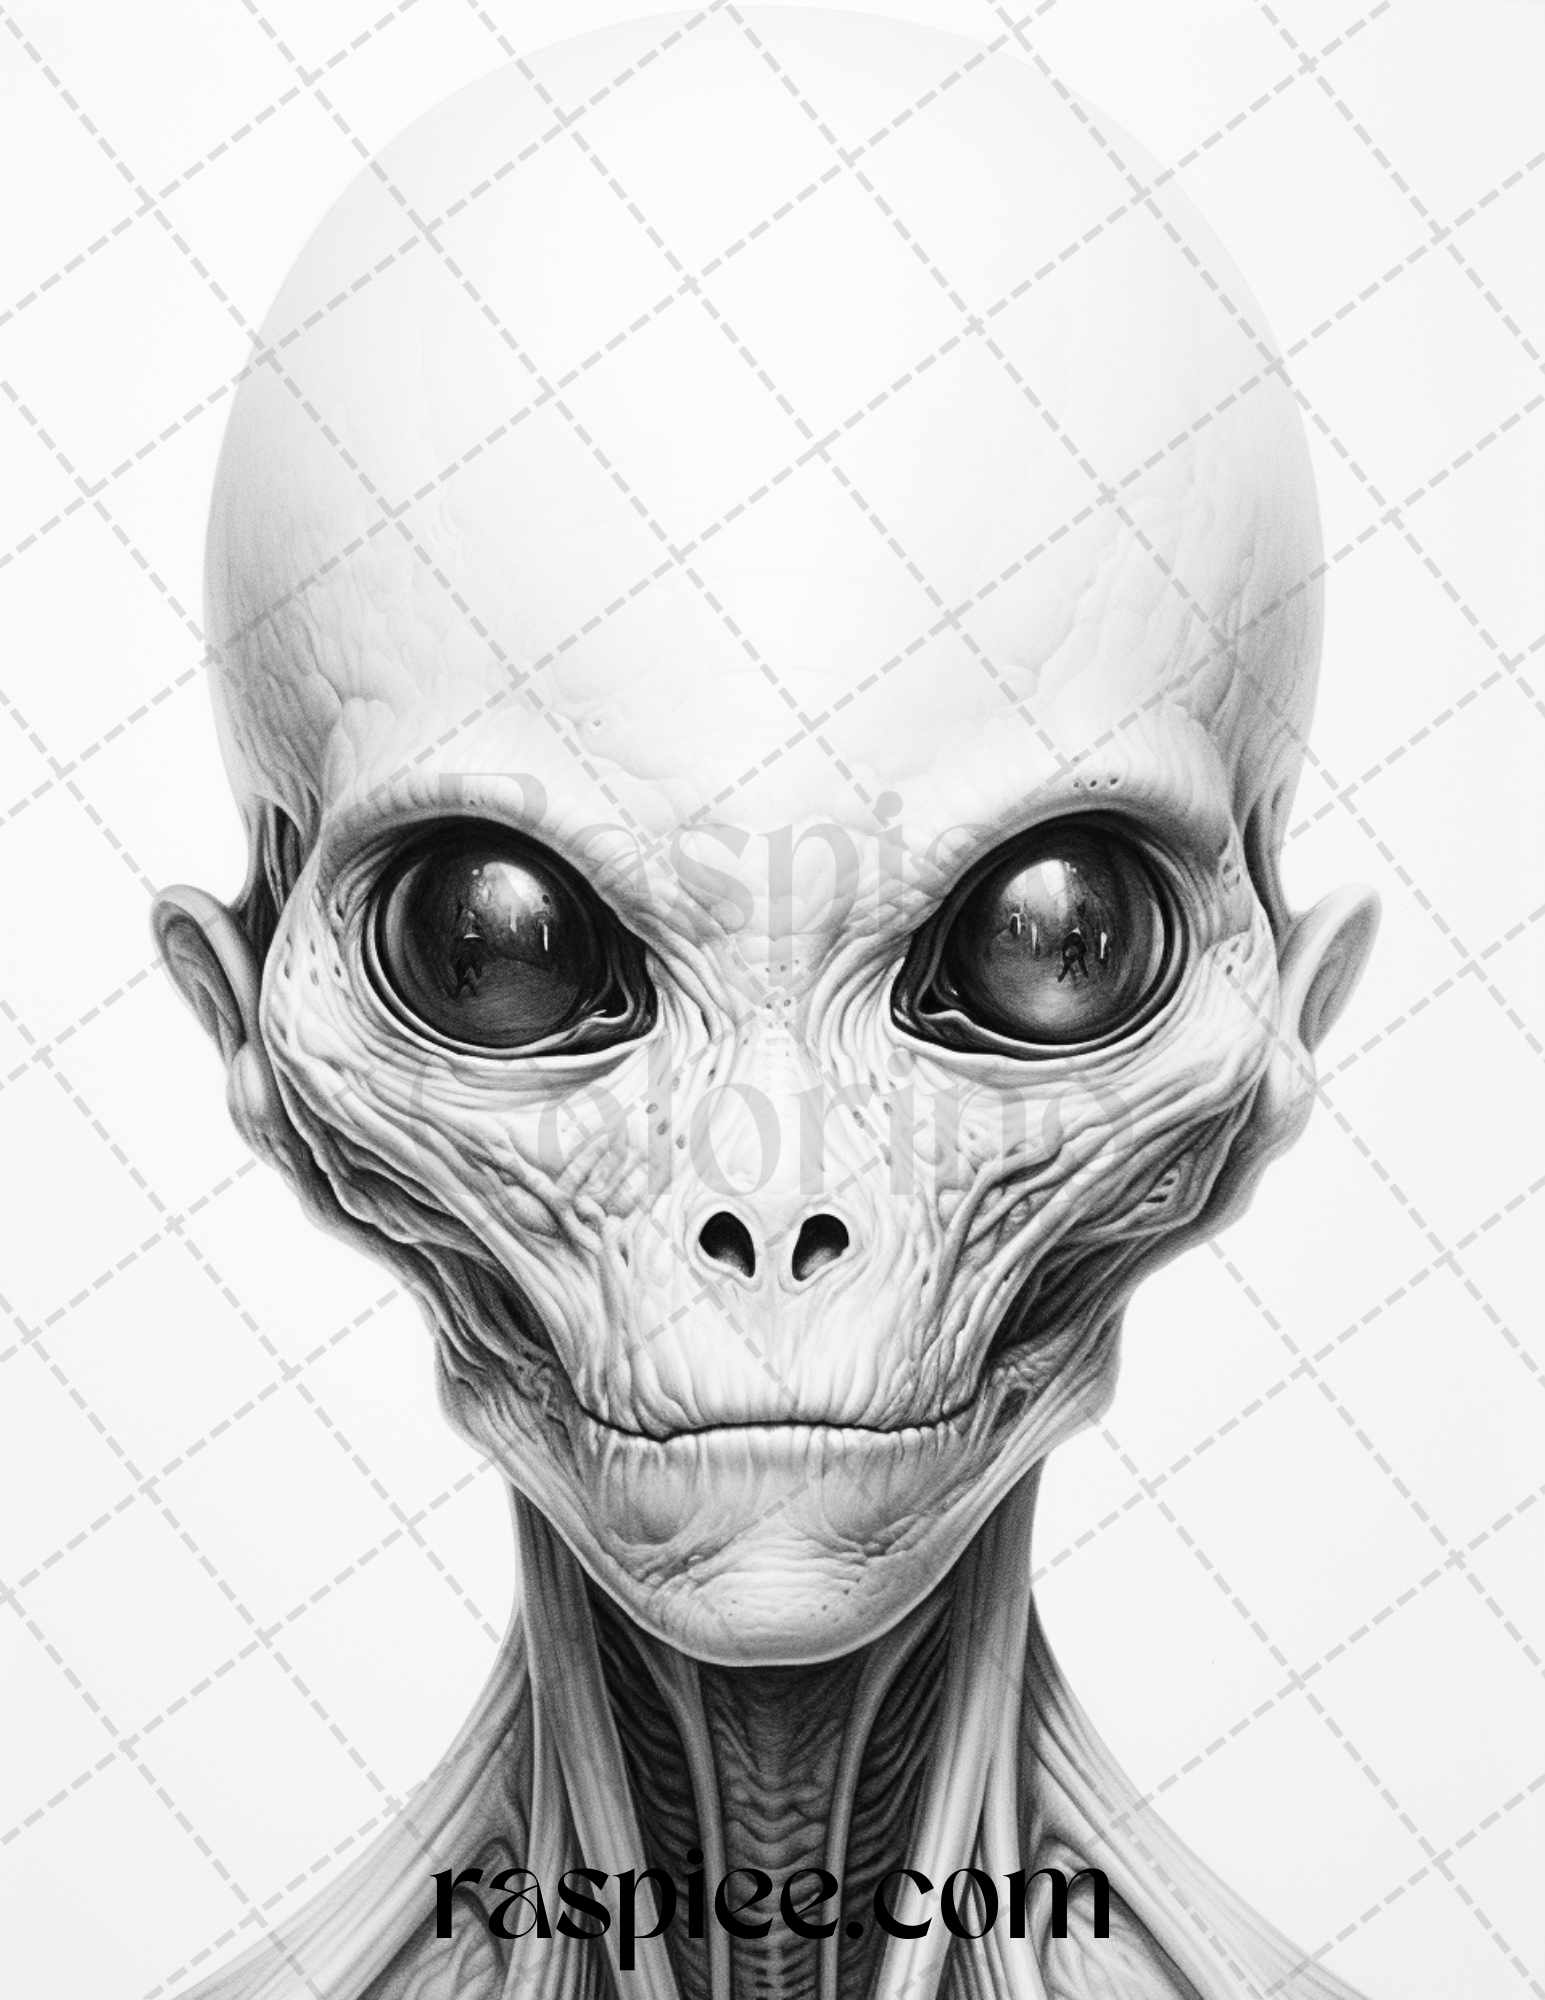 Alien Portrait Coloring Pages, Grayscale Sci-Fi Fantasy Coloring Pages, Printable Adult Coloring Sheets, Instant Download Printable, Relaxing Coloring Activity, Intricate Space Creatures, Cosmic Coloring Book Pages, Stress-Relieving Sci-Fi Art